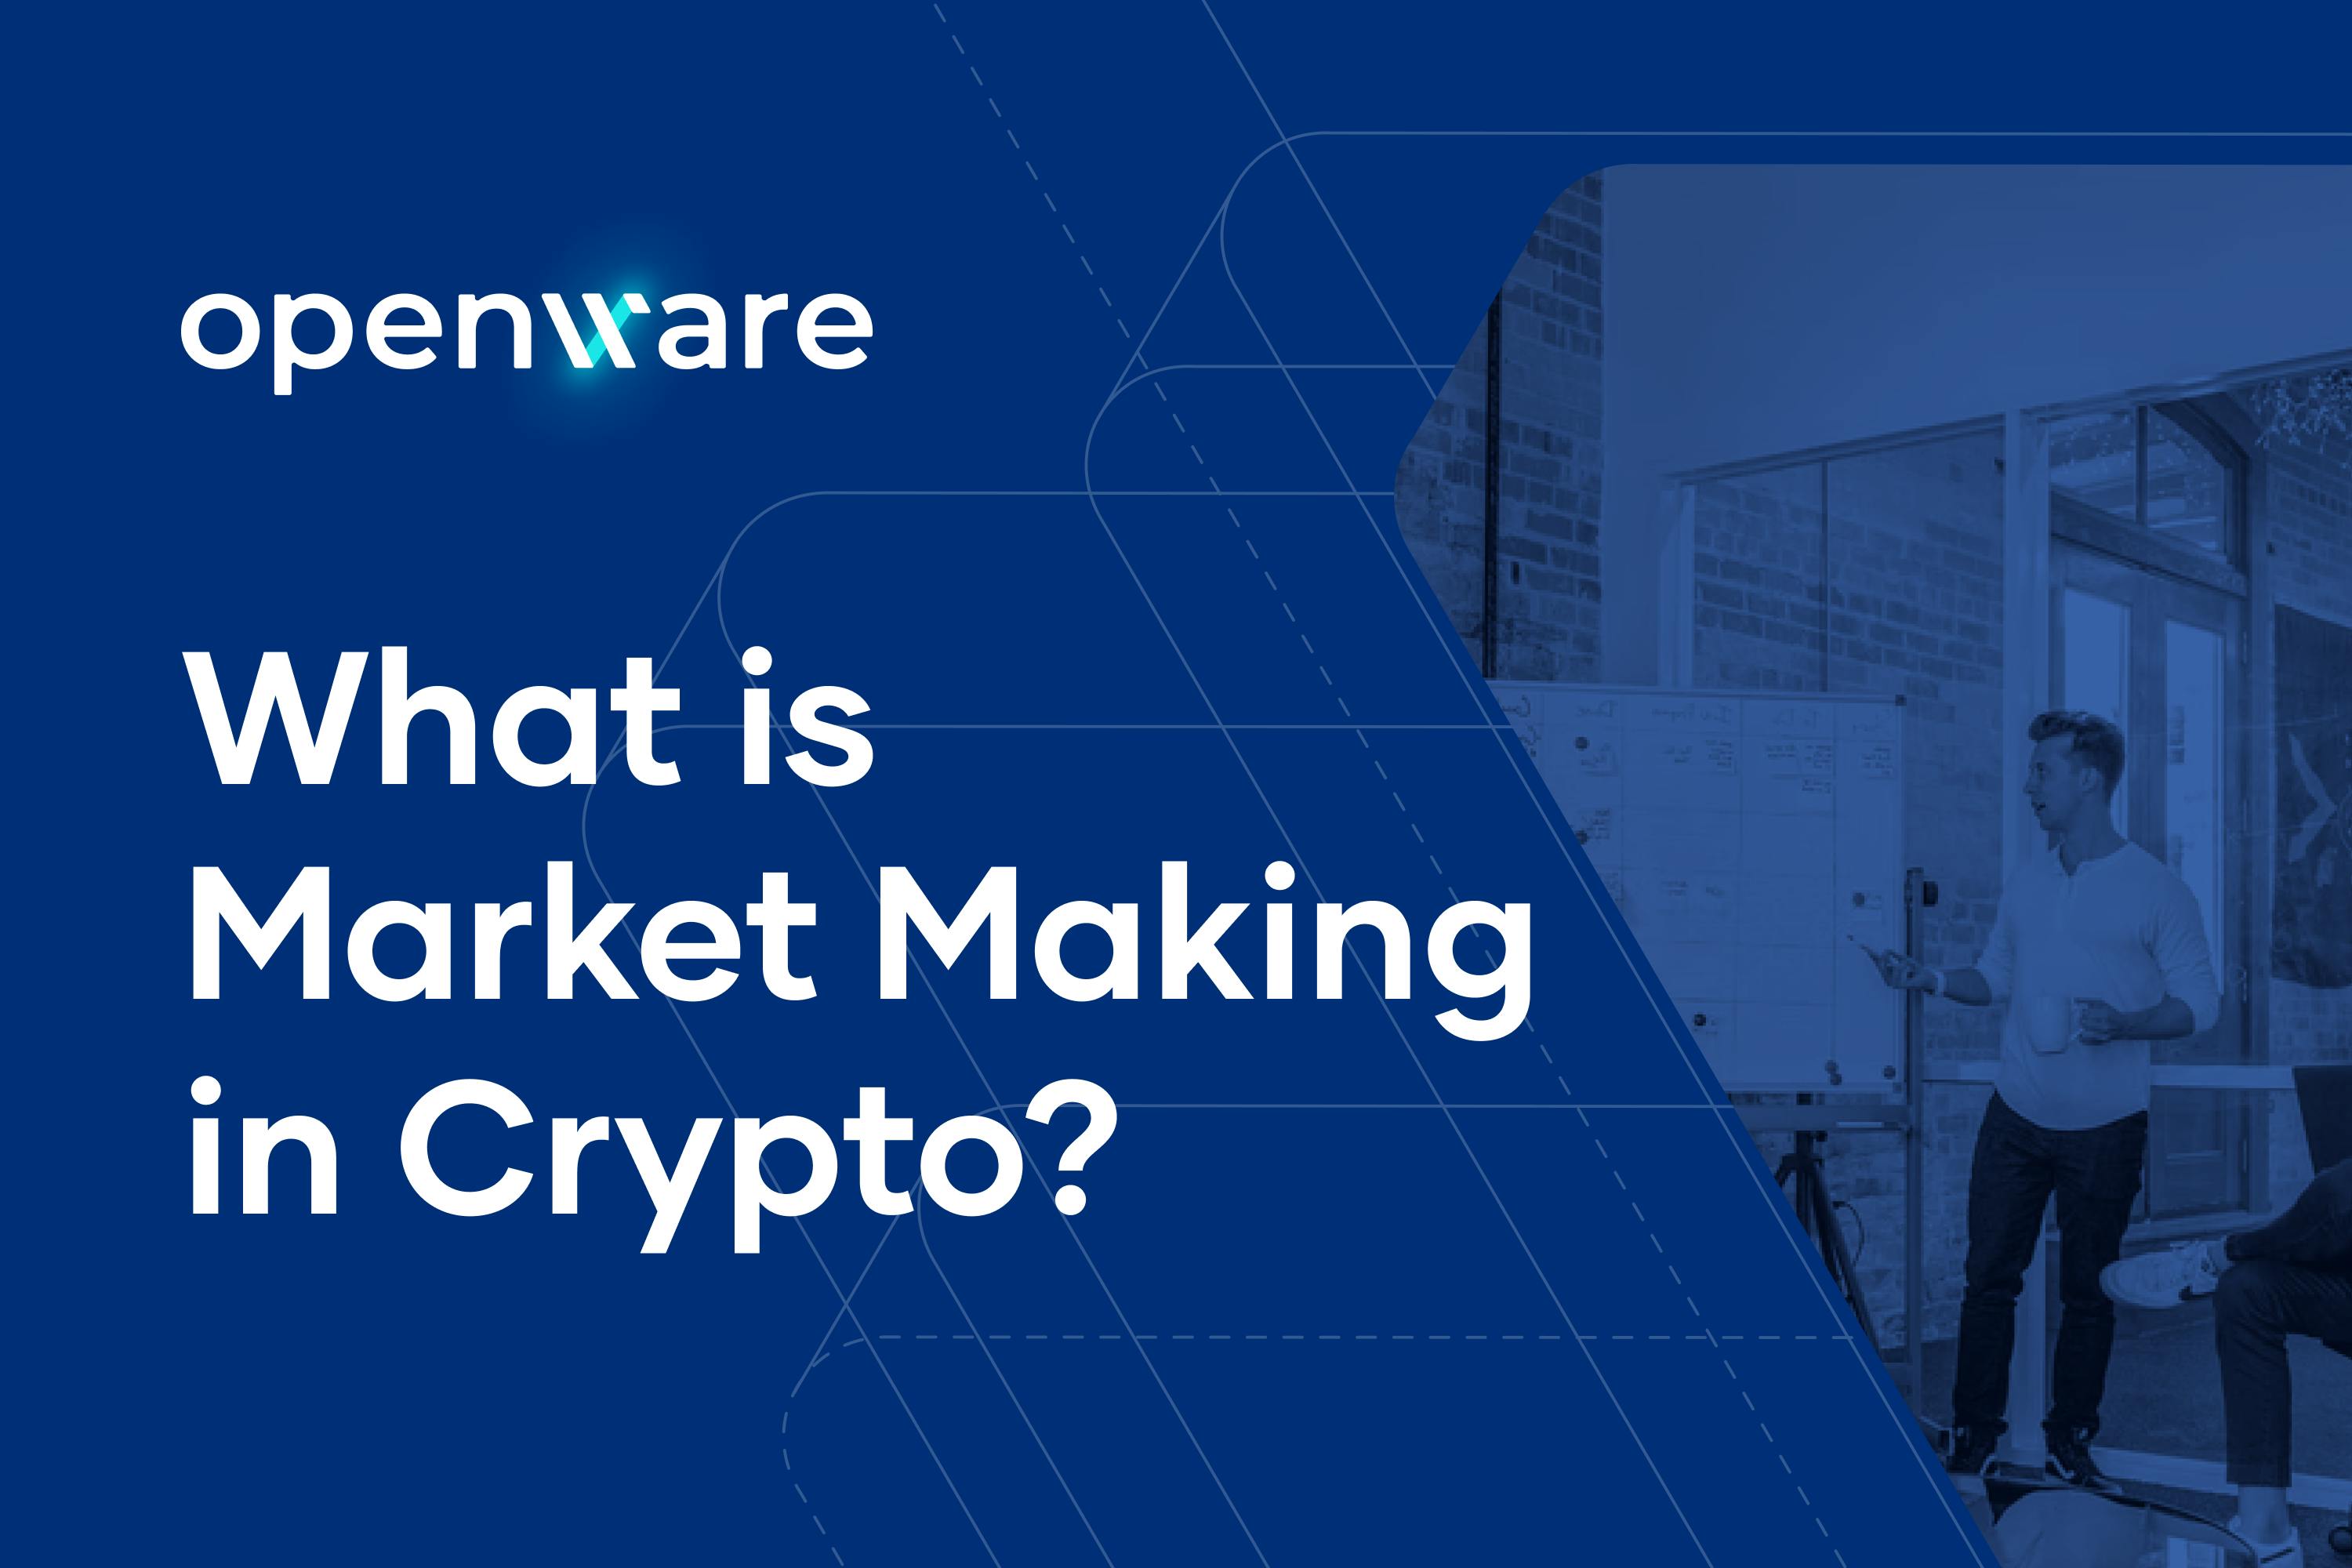 Banner Image showing the words "What is Market Making in Crypto?"